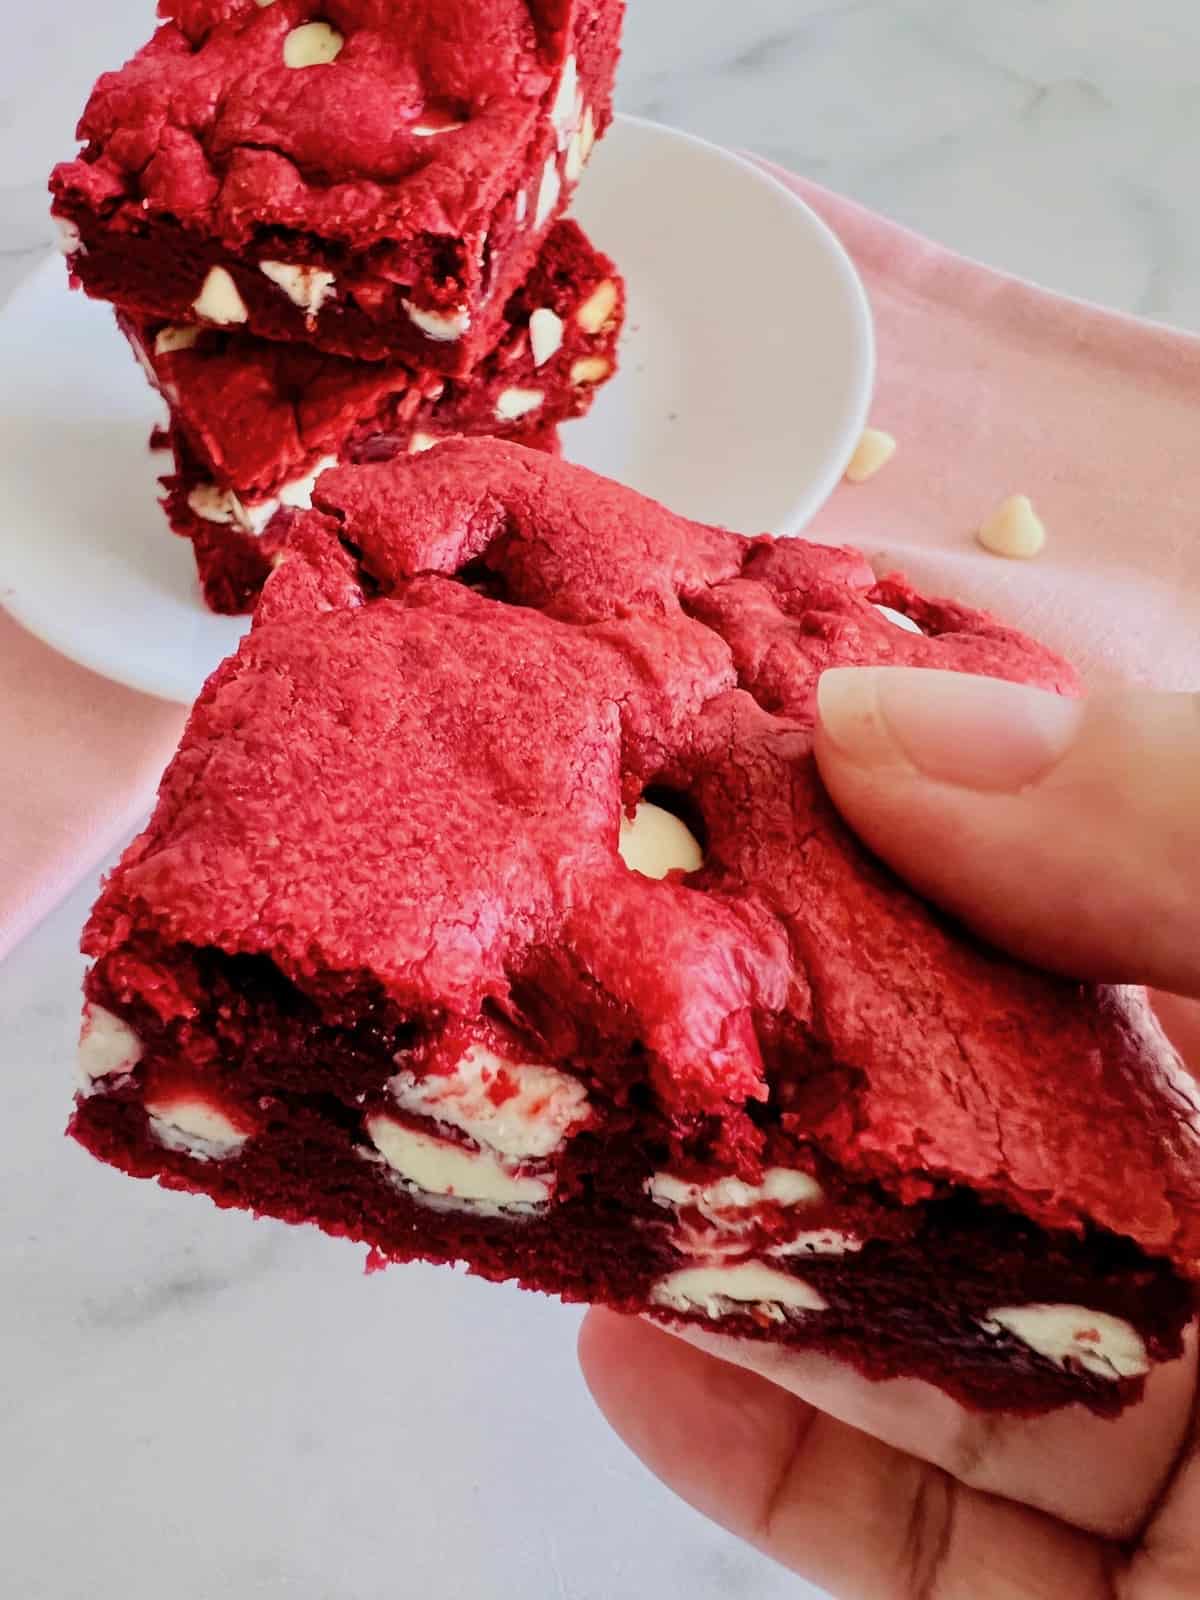 Red Velvet Brownies with Cake Mix Hand holding one and a plate of them in the background.